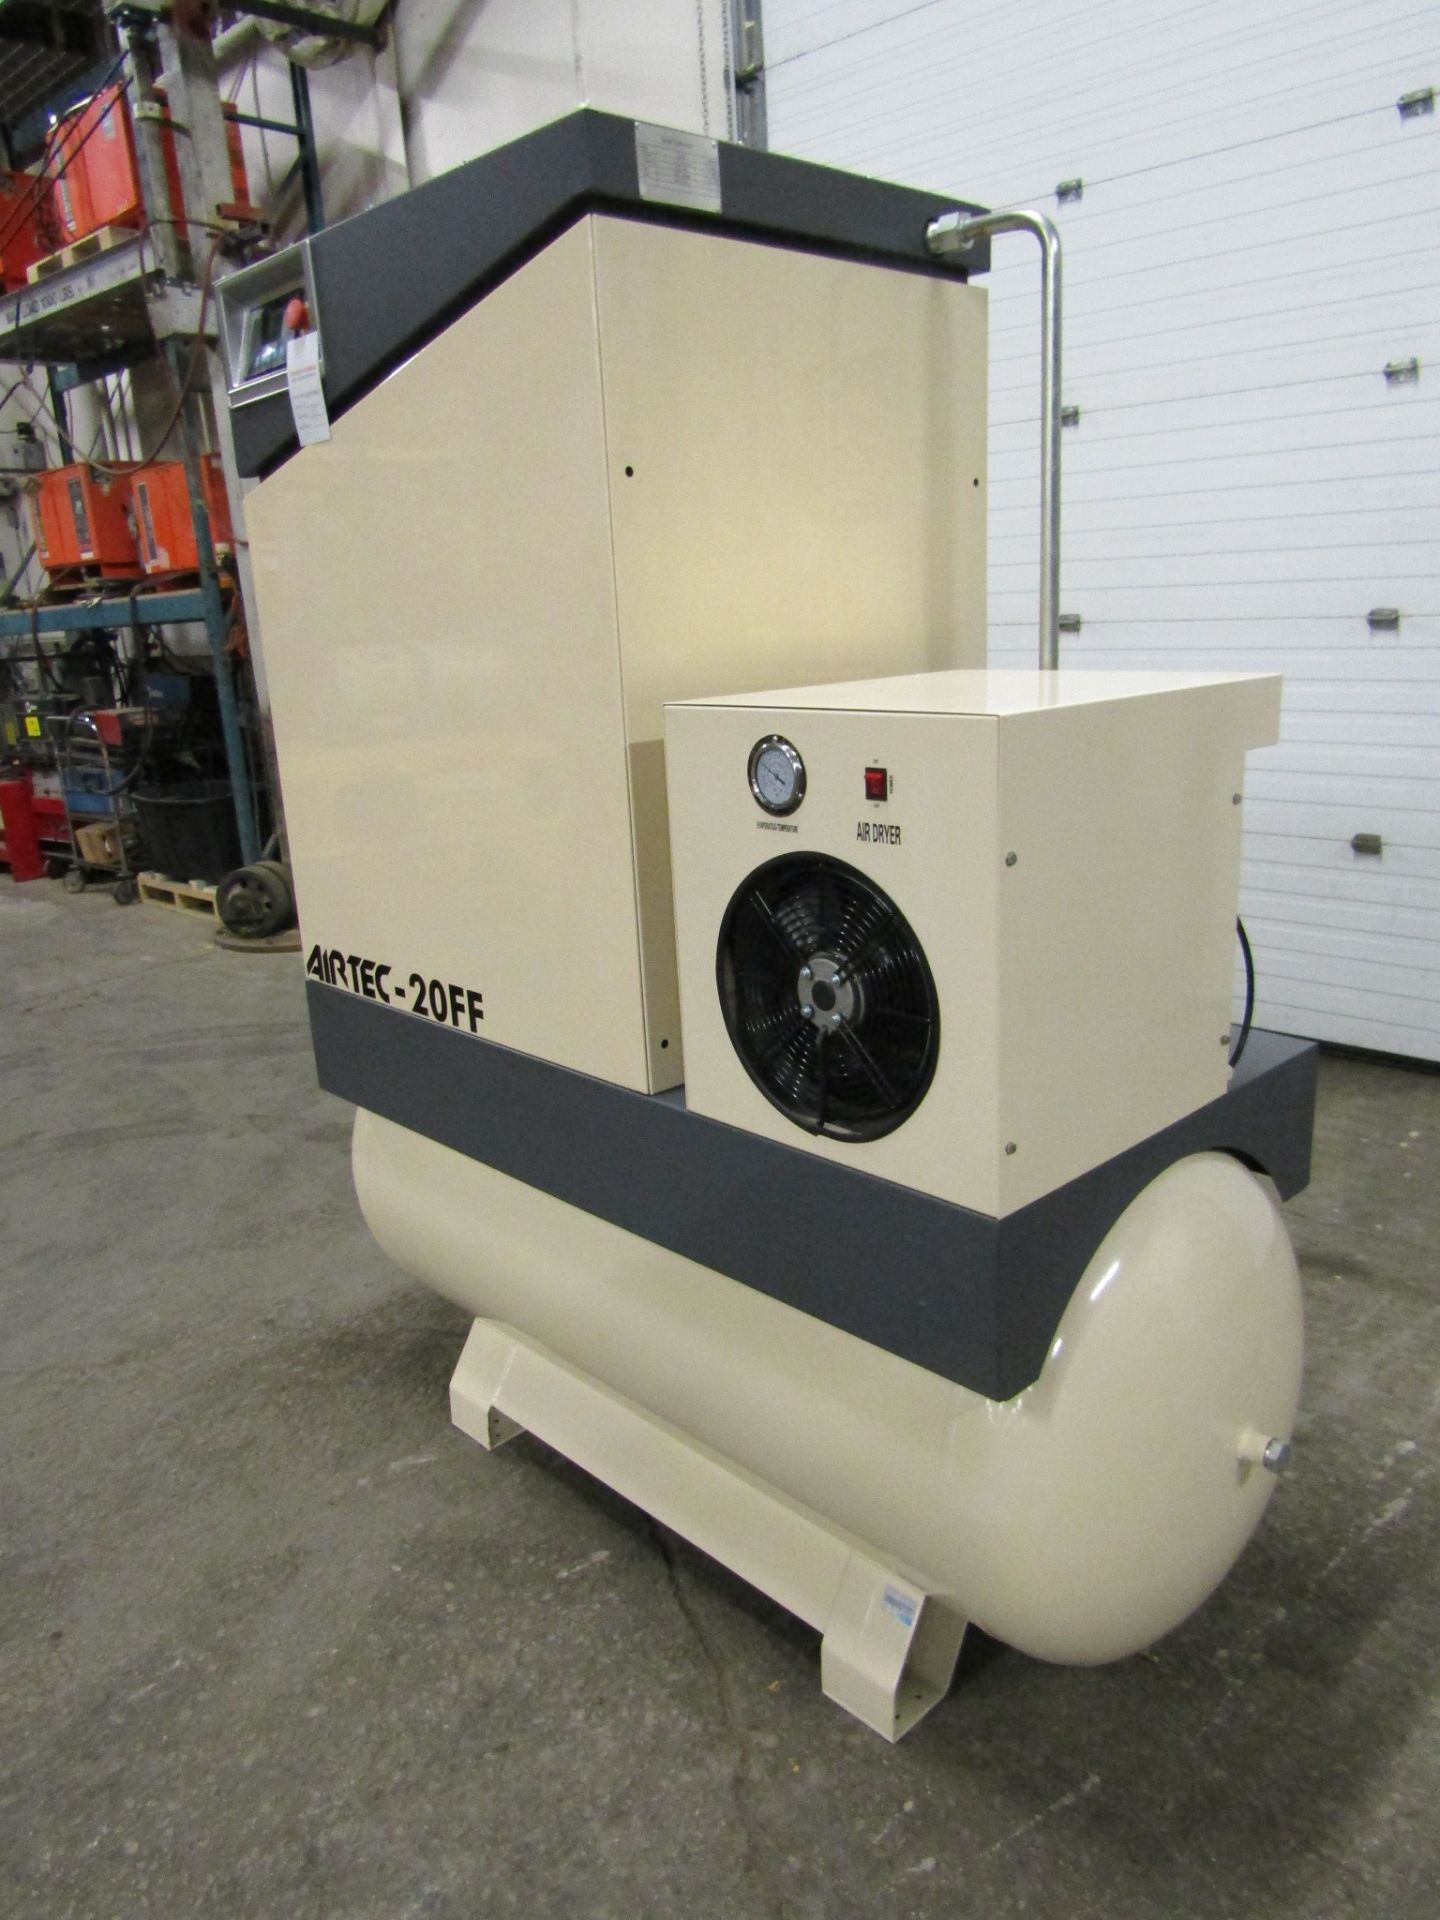 Airtec model 20FF - 20HP Air Compressor with built on DRYER - MINT UNUSED COMPRESSOR with 125 Gallon - Image 2 of 2